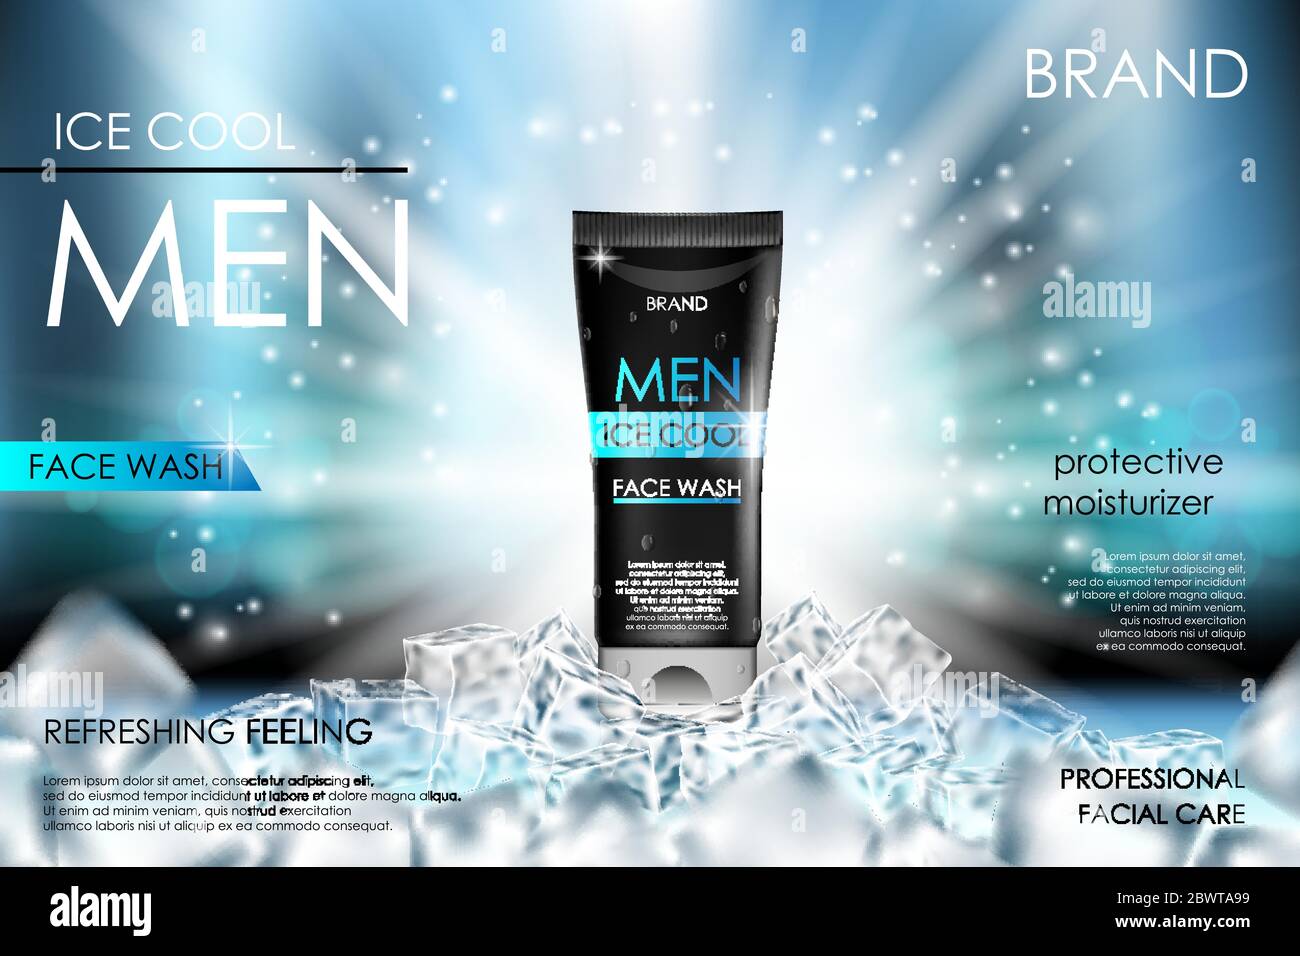 https://c8.alamy.com/comp/2BWTA99/cooling-men-face-wash-with-ice-cubes-realistic-cool-refreshing-bottle-packaging-ad-for-poster-skin-care-product-design-3d-vector-illustration-2BWTA99.jpg